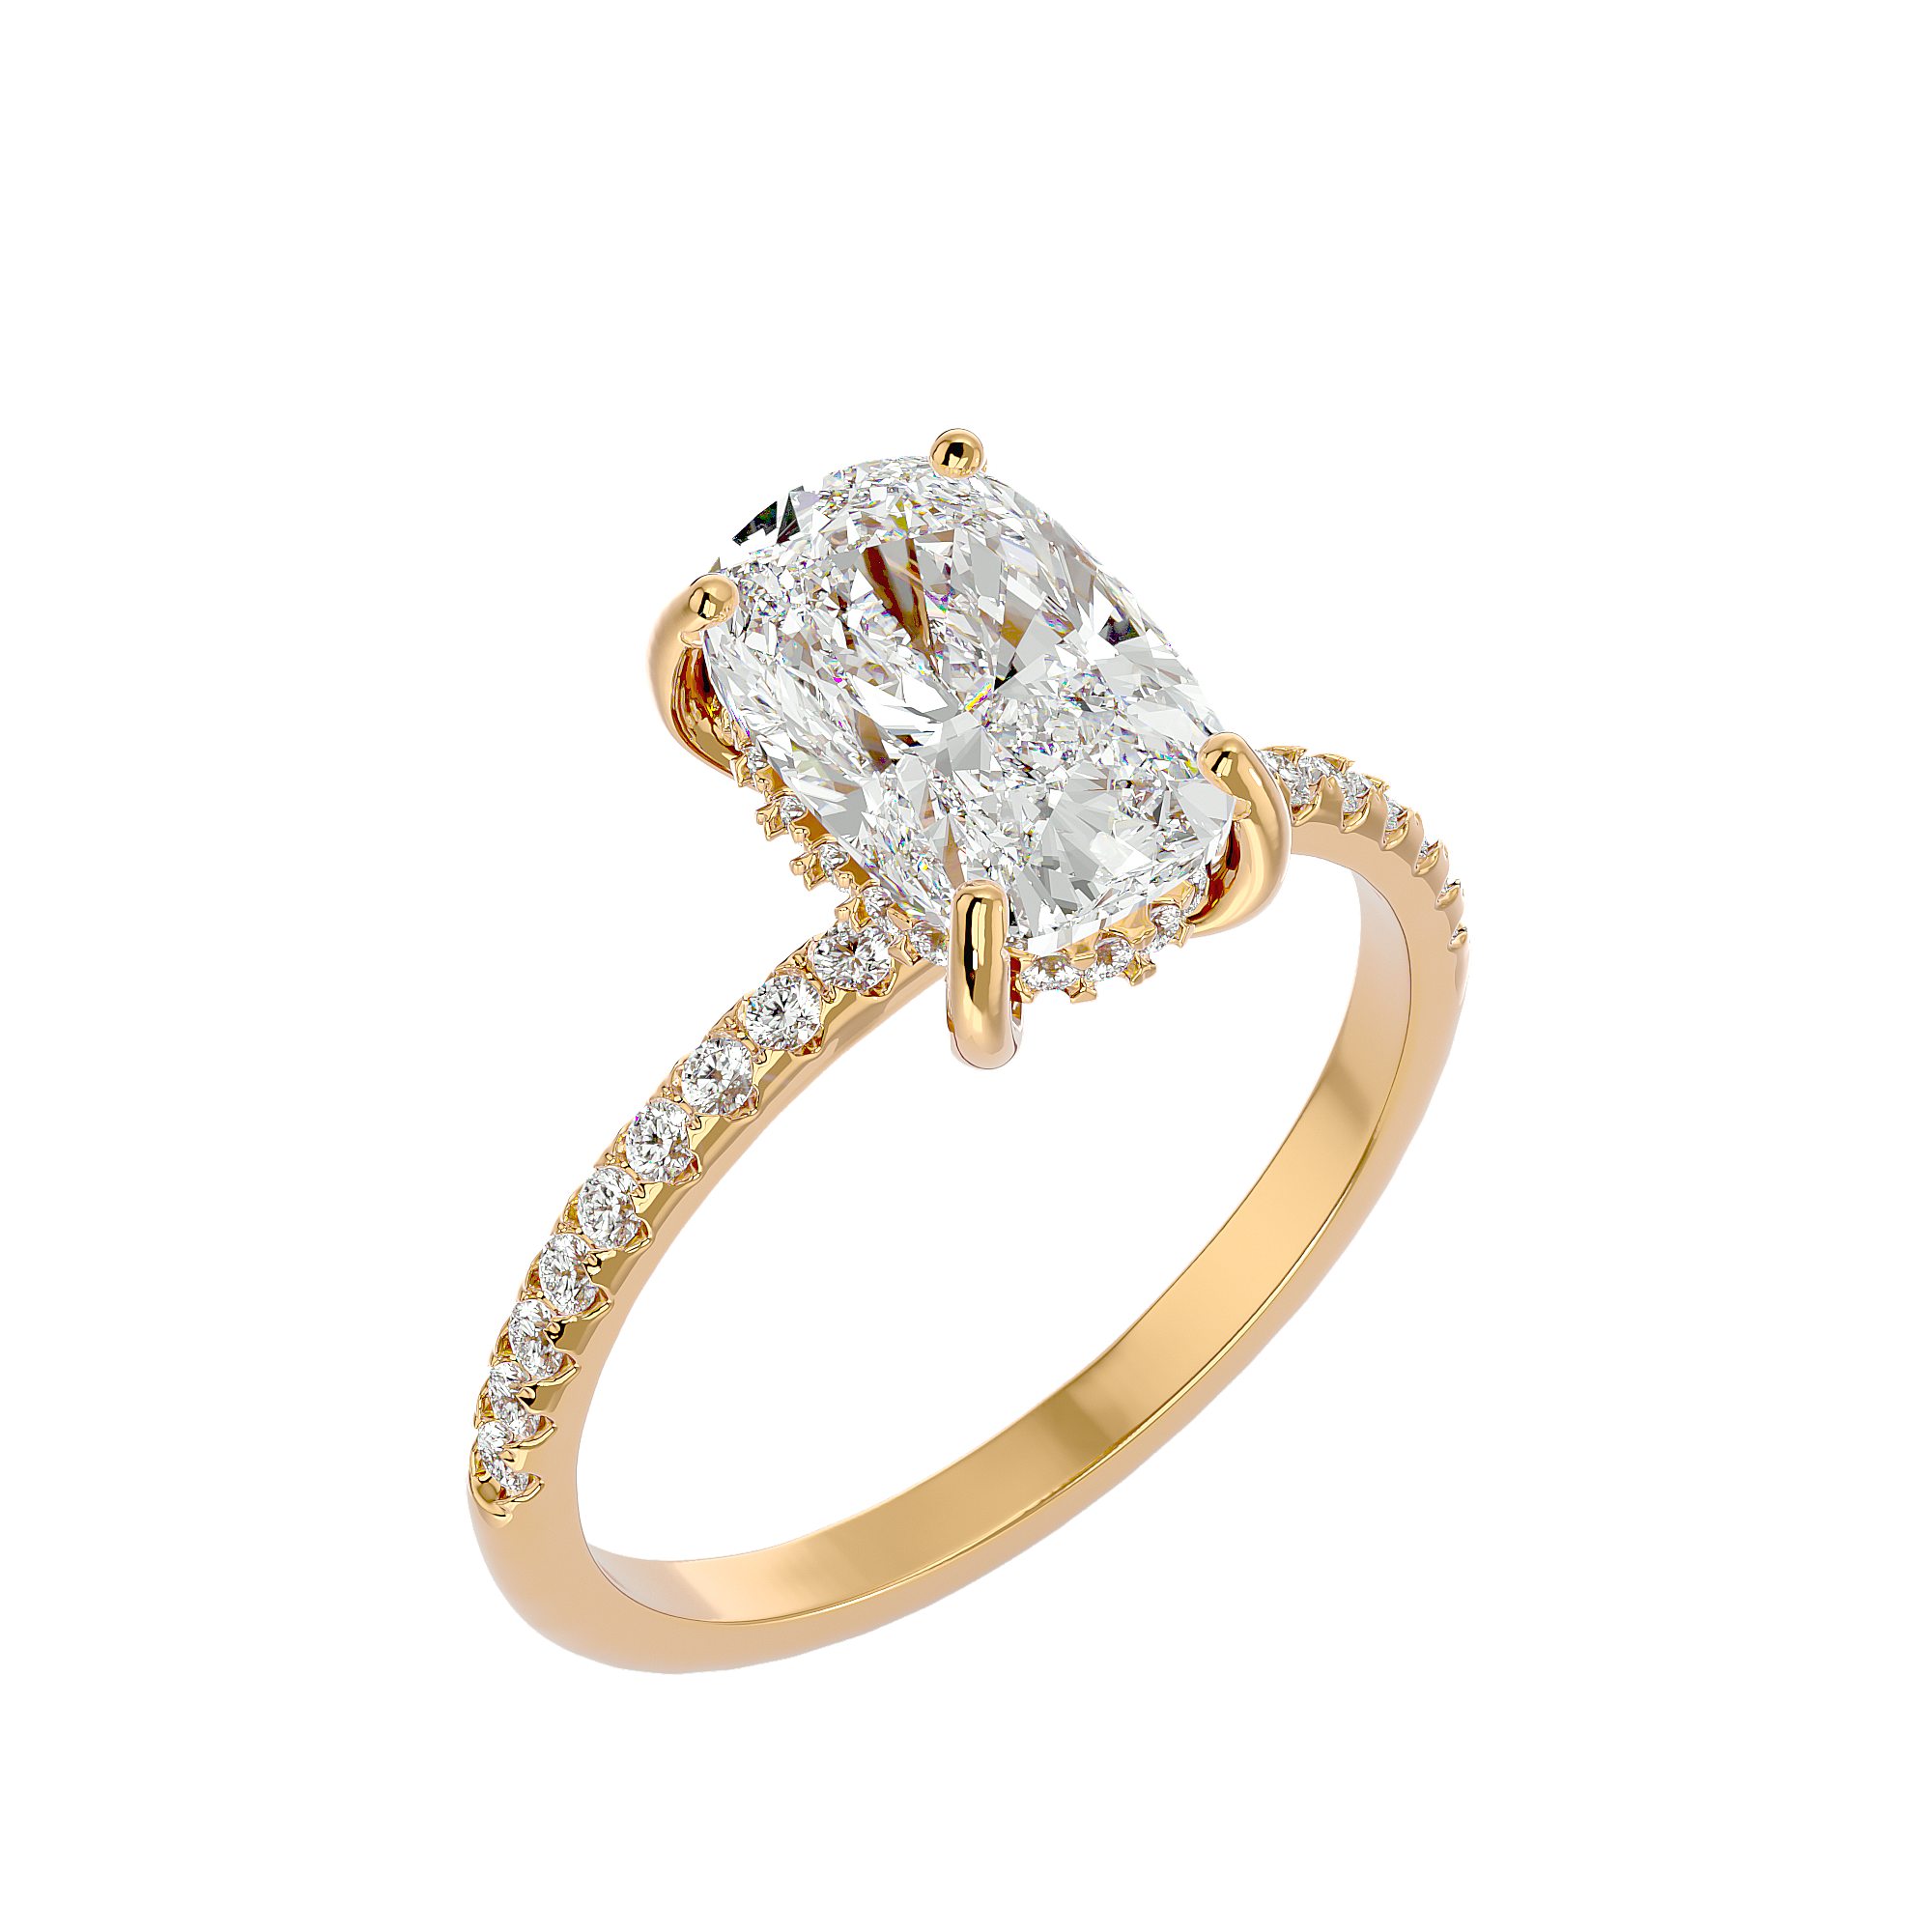 The Ophelia Ring - Elongated Cushion Cut With Hidden Halo